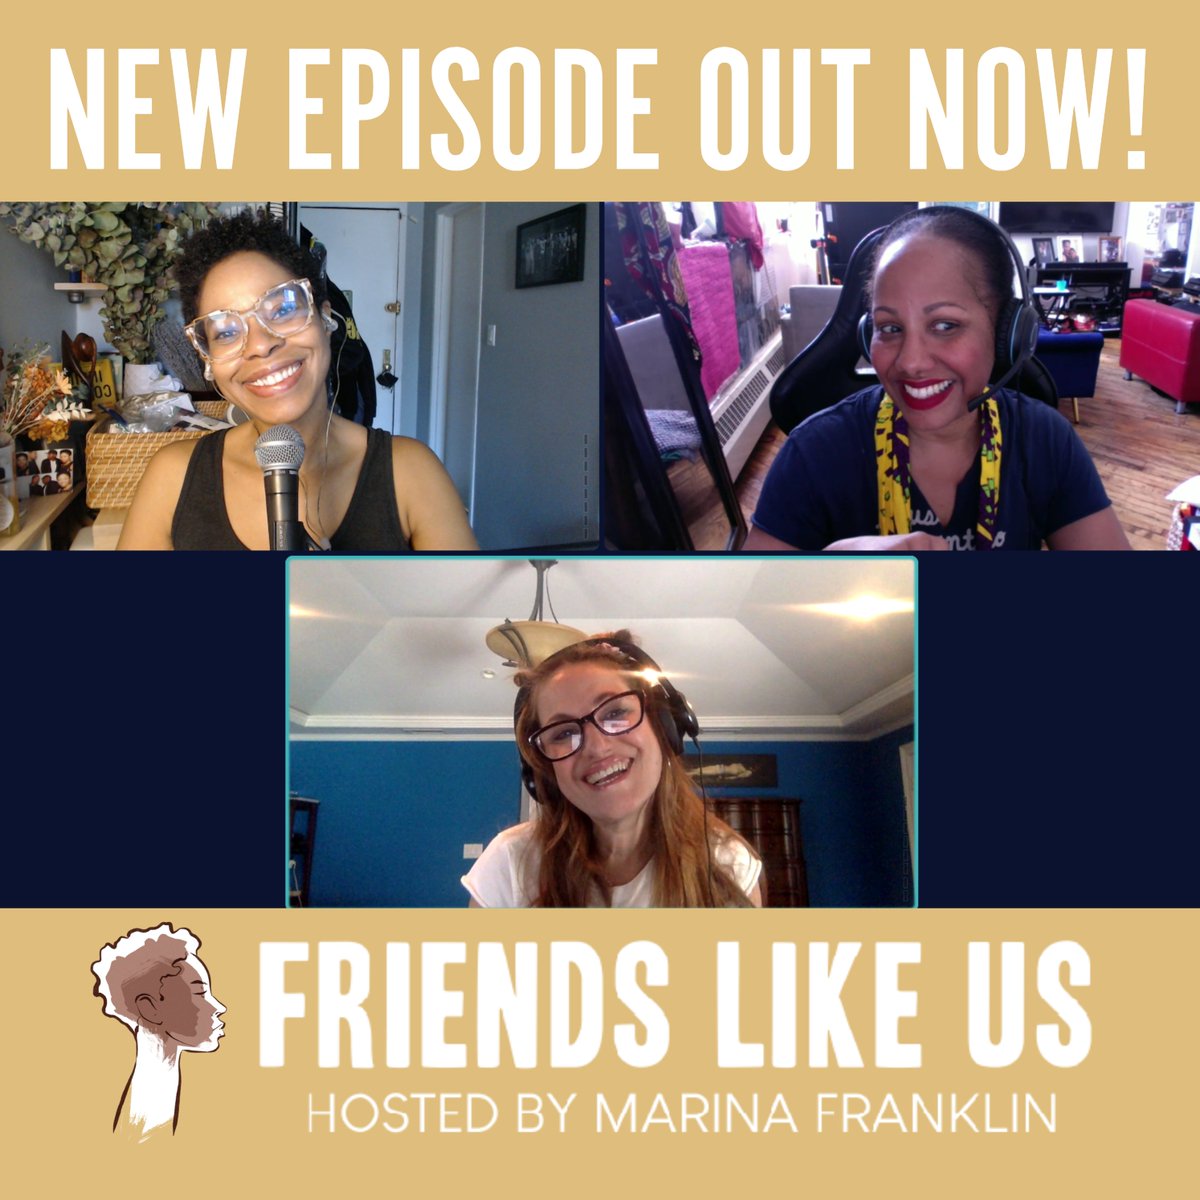 It's #FriendsLikeUs Day! Listen to host @marinayfranklin & friends @irenebremis13 @hollieharper5 talk about Irene's new special #Sweetie, #SubwaySafety #WomenInSports #OJ and more! #CheckItOut and #subscribe here! ow.ly/qlYo50LXHK5 Review #FriendsLikeUs on #ApplePodcasts!